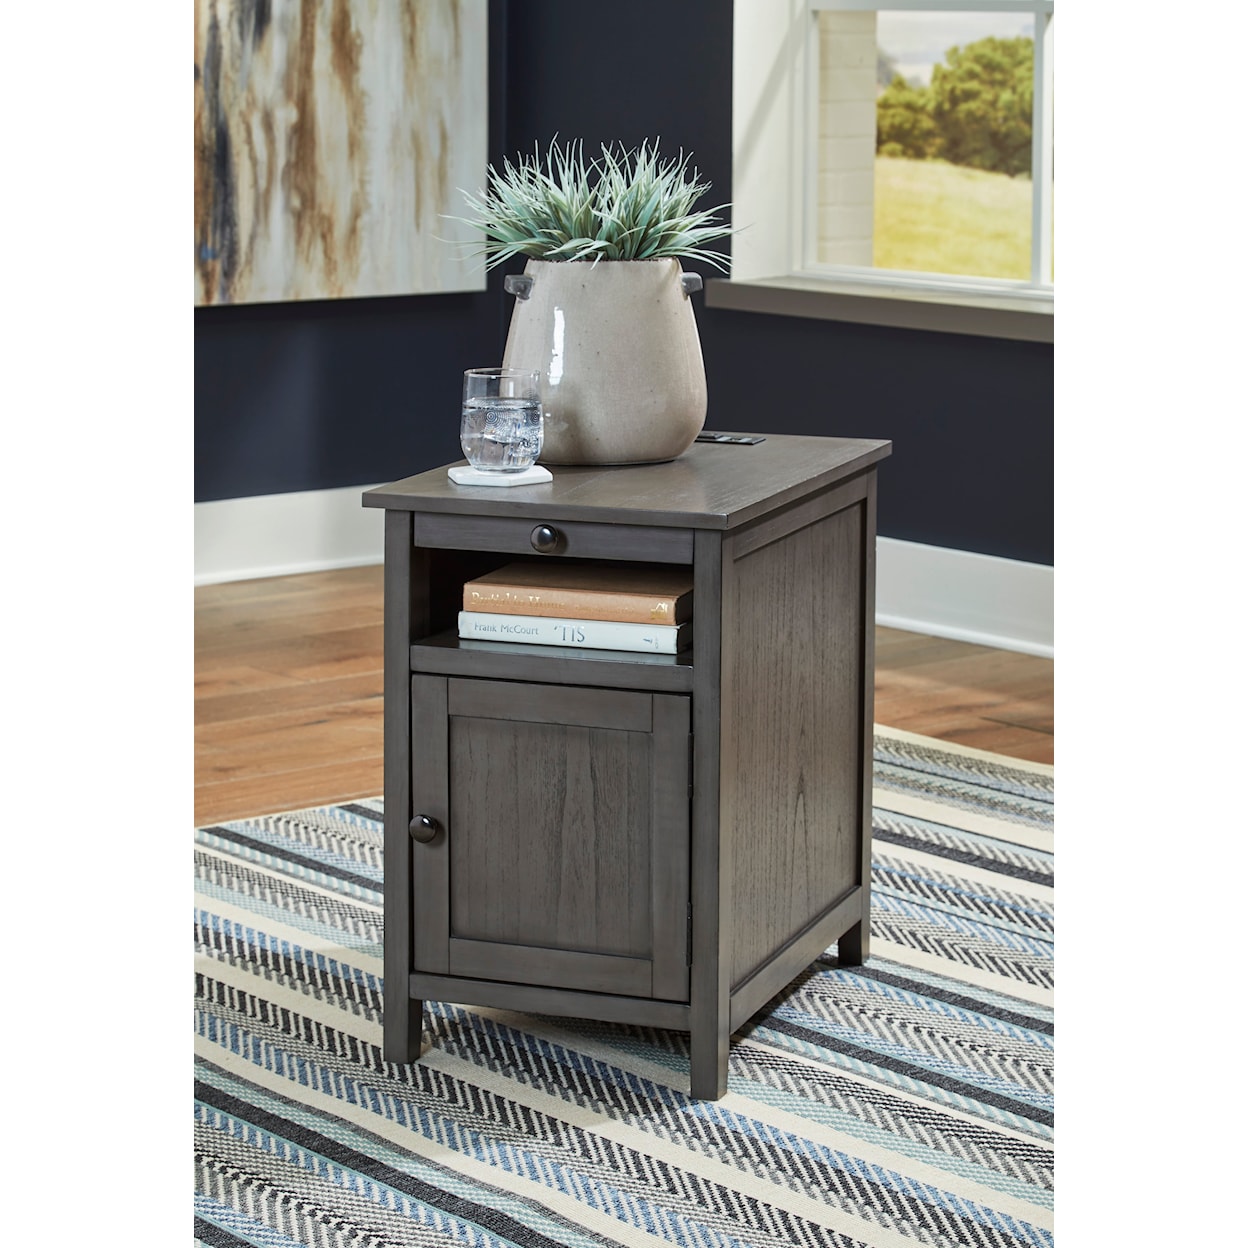 Benchcraft Treytown Chairside End Table